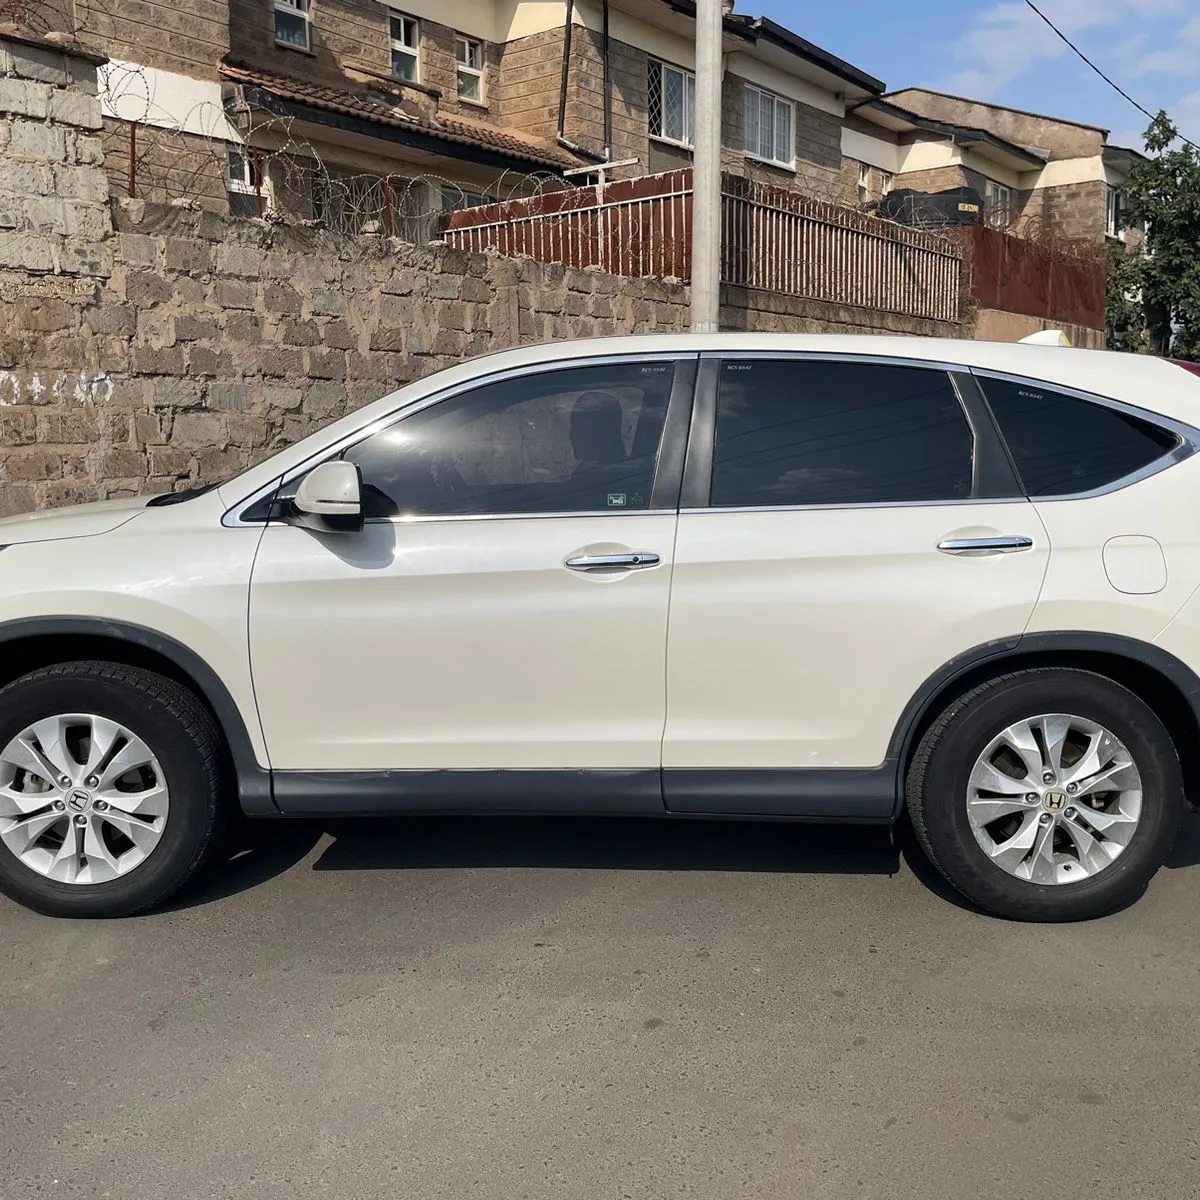 Cars For Sale/Vehicles Cars-Honda CRV 🔥 QUICK SALE You Pay 30% Deposit Trade in OK EXCLUSIVE 7